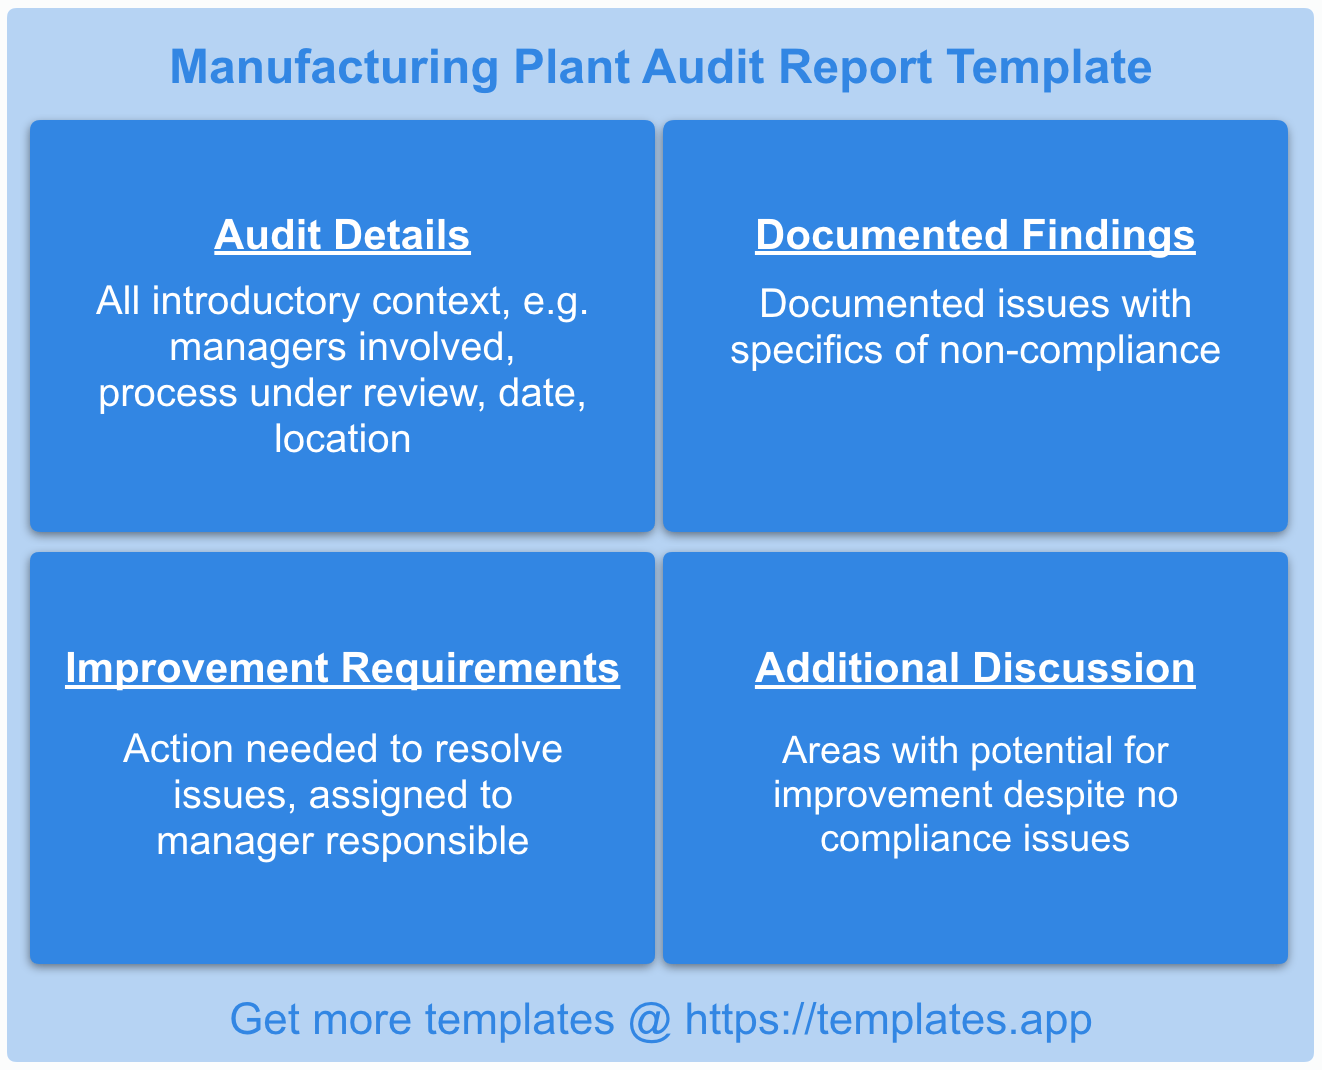 Audit Report: Manufacturing Plant by templates.app